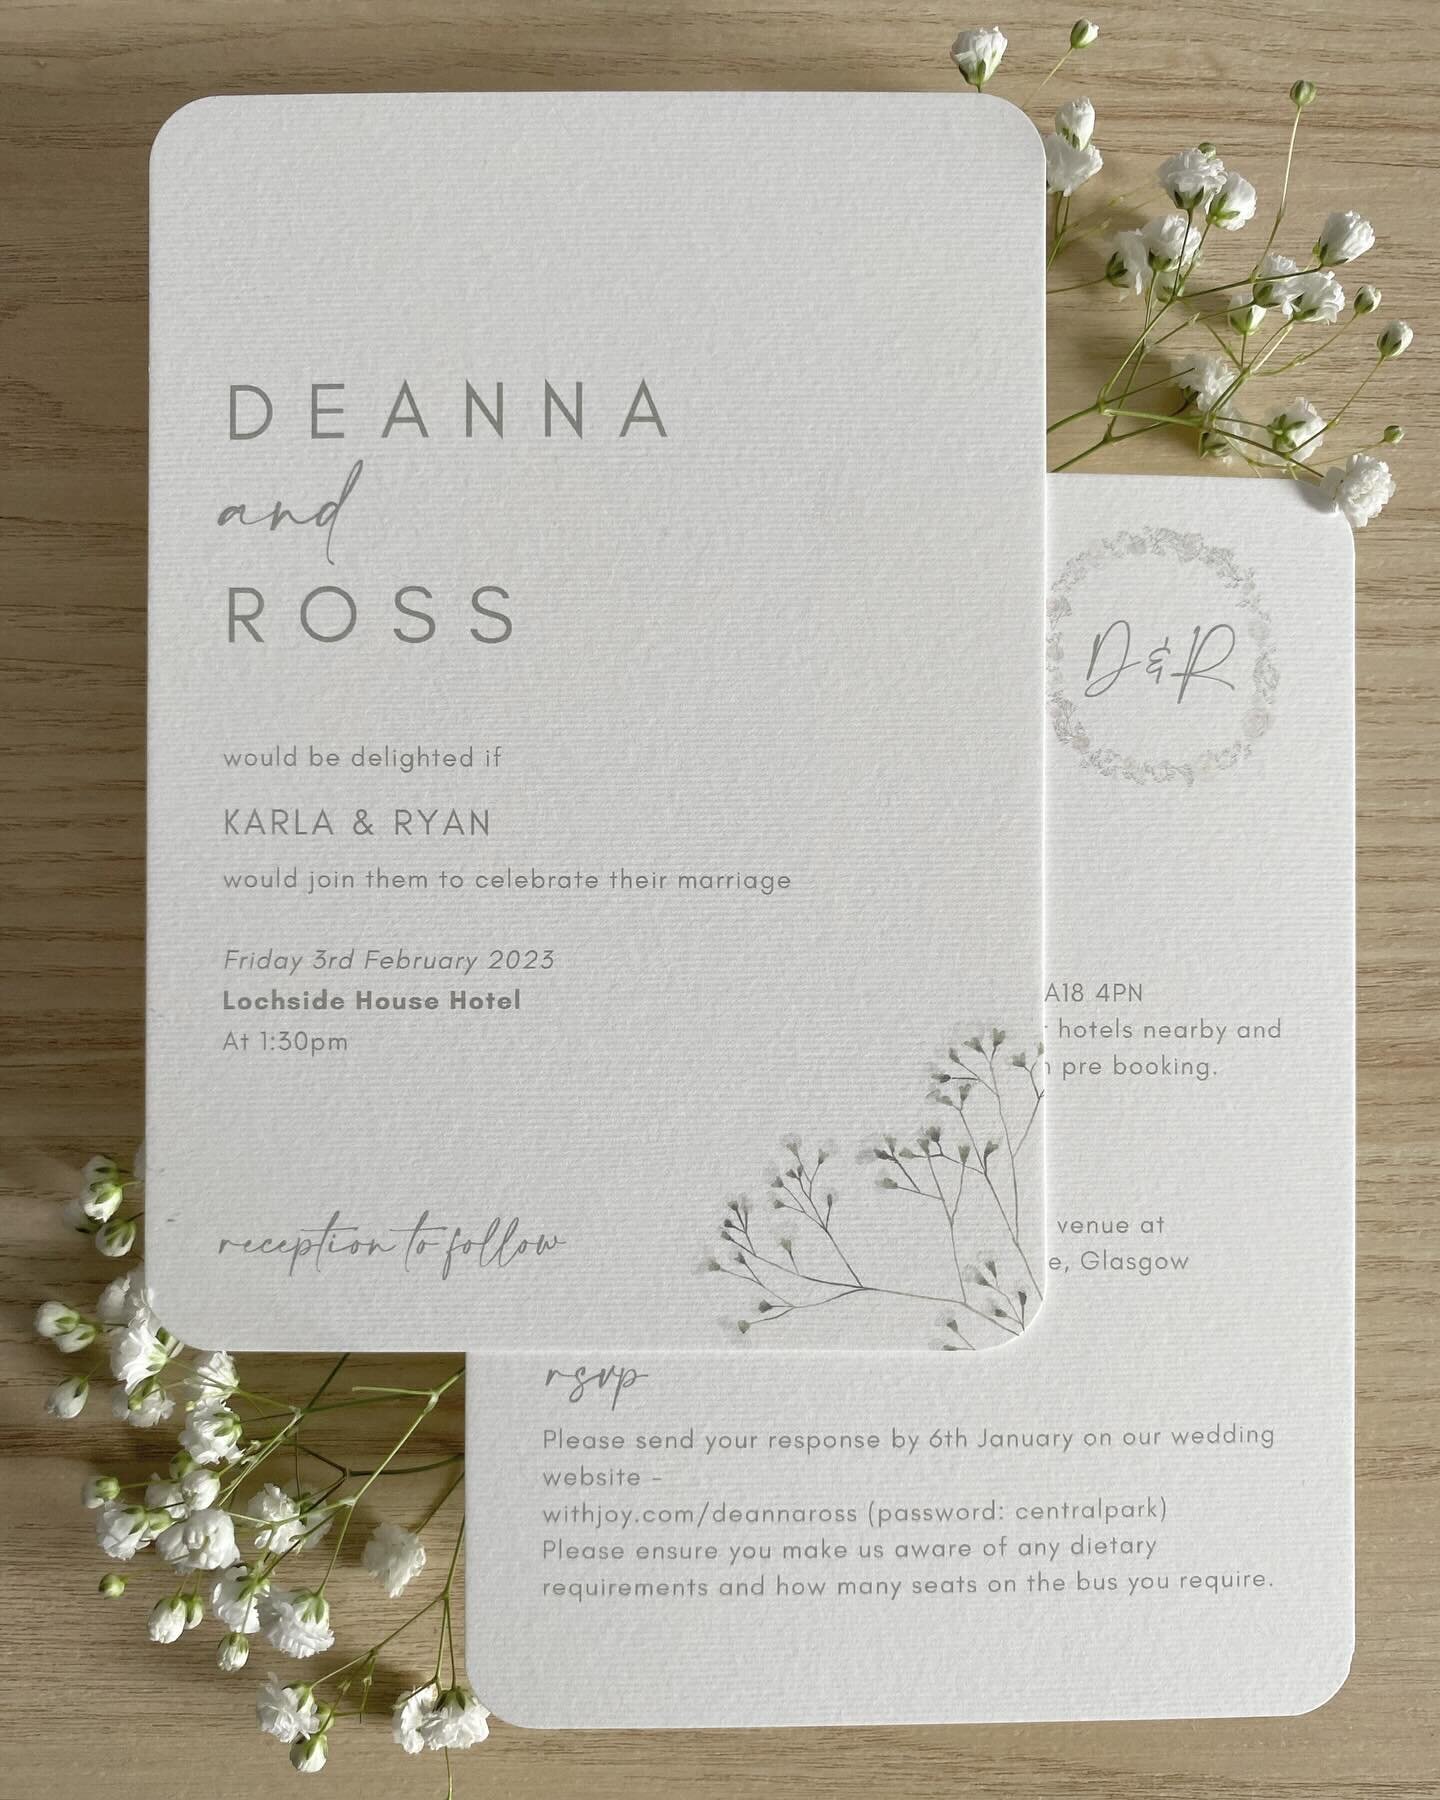 House Suite Number 4 - Who else loves gypsophila? This is Deanna 🤍 Classic and minimal with subtle sage green highlights and soft rounded corners, I love this one. If gypsophila isn't in your wedding flowers, change it to something that is so it fit